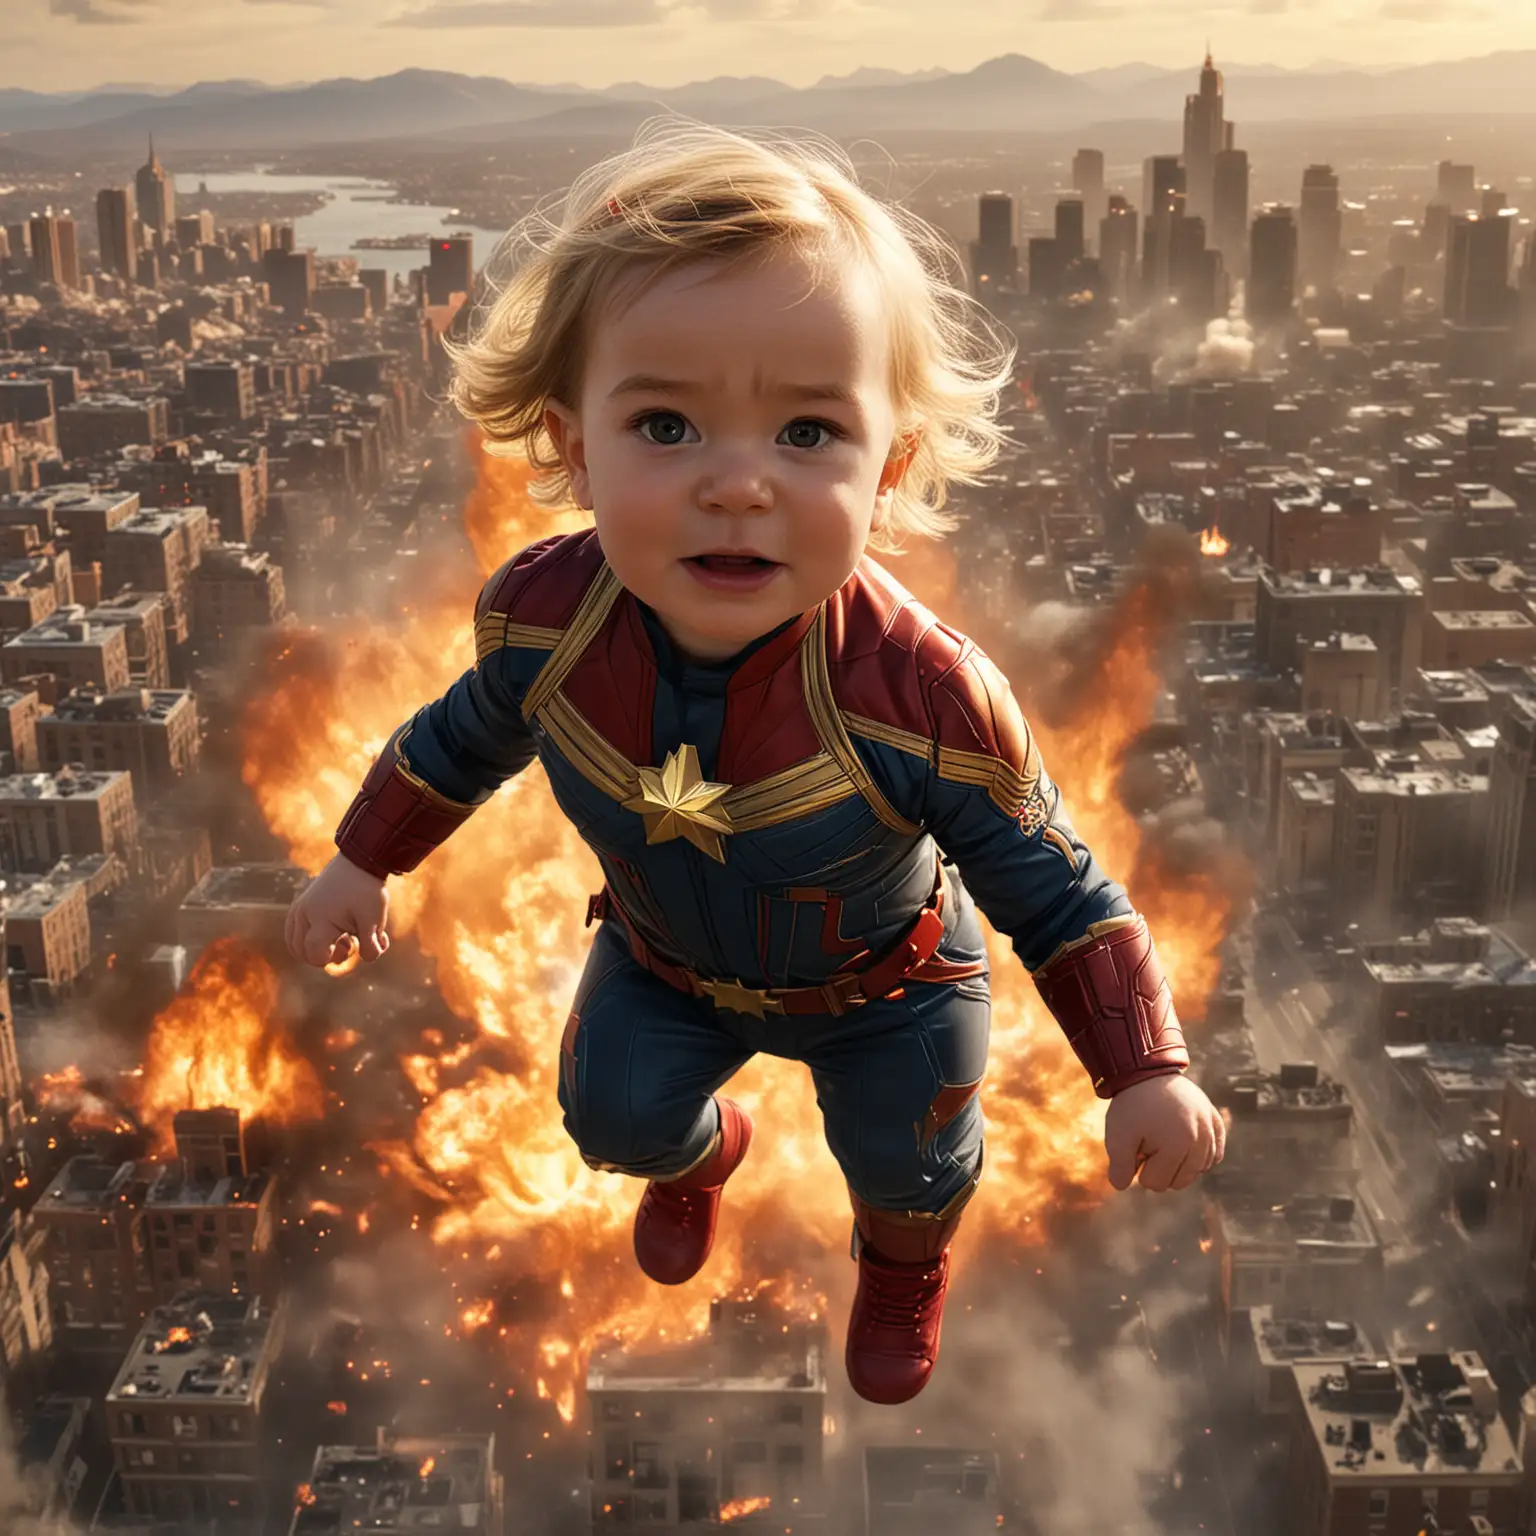 Toddler in Captain Marvel Costume Soaring Over Fiery Cityscape